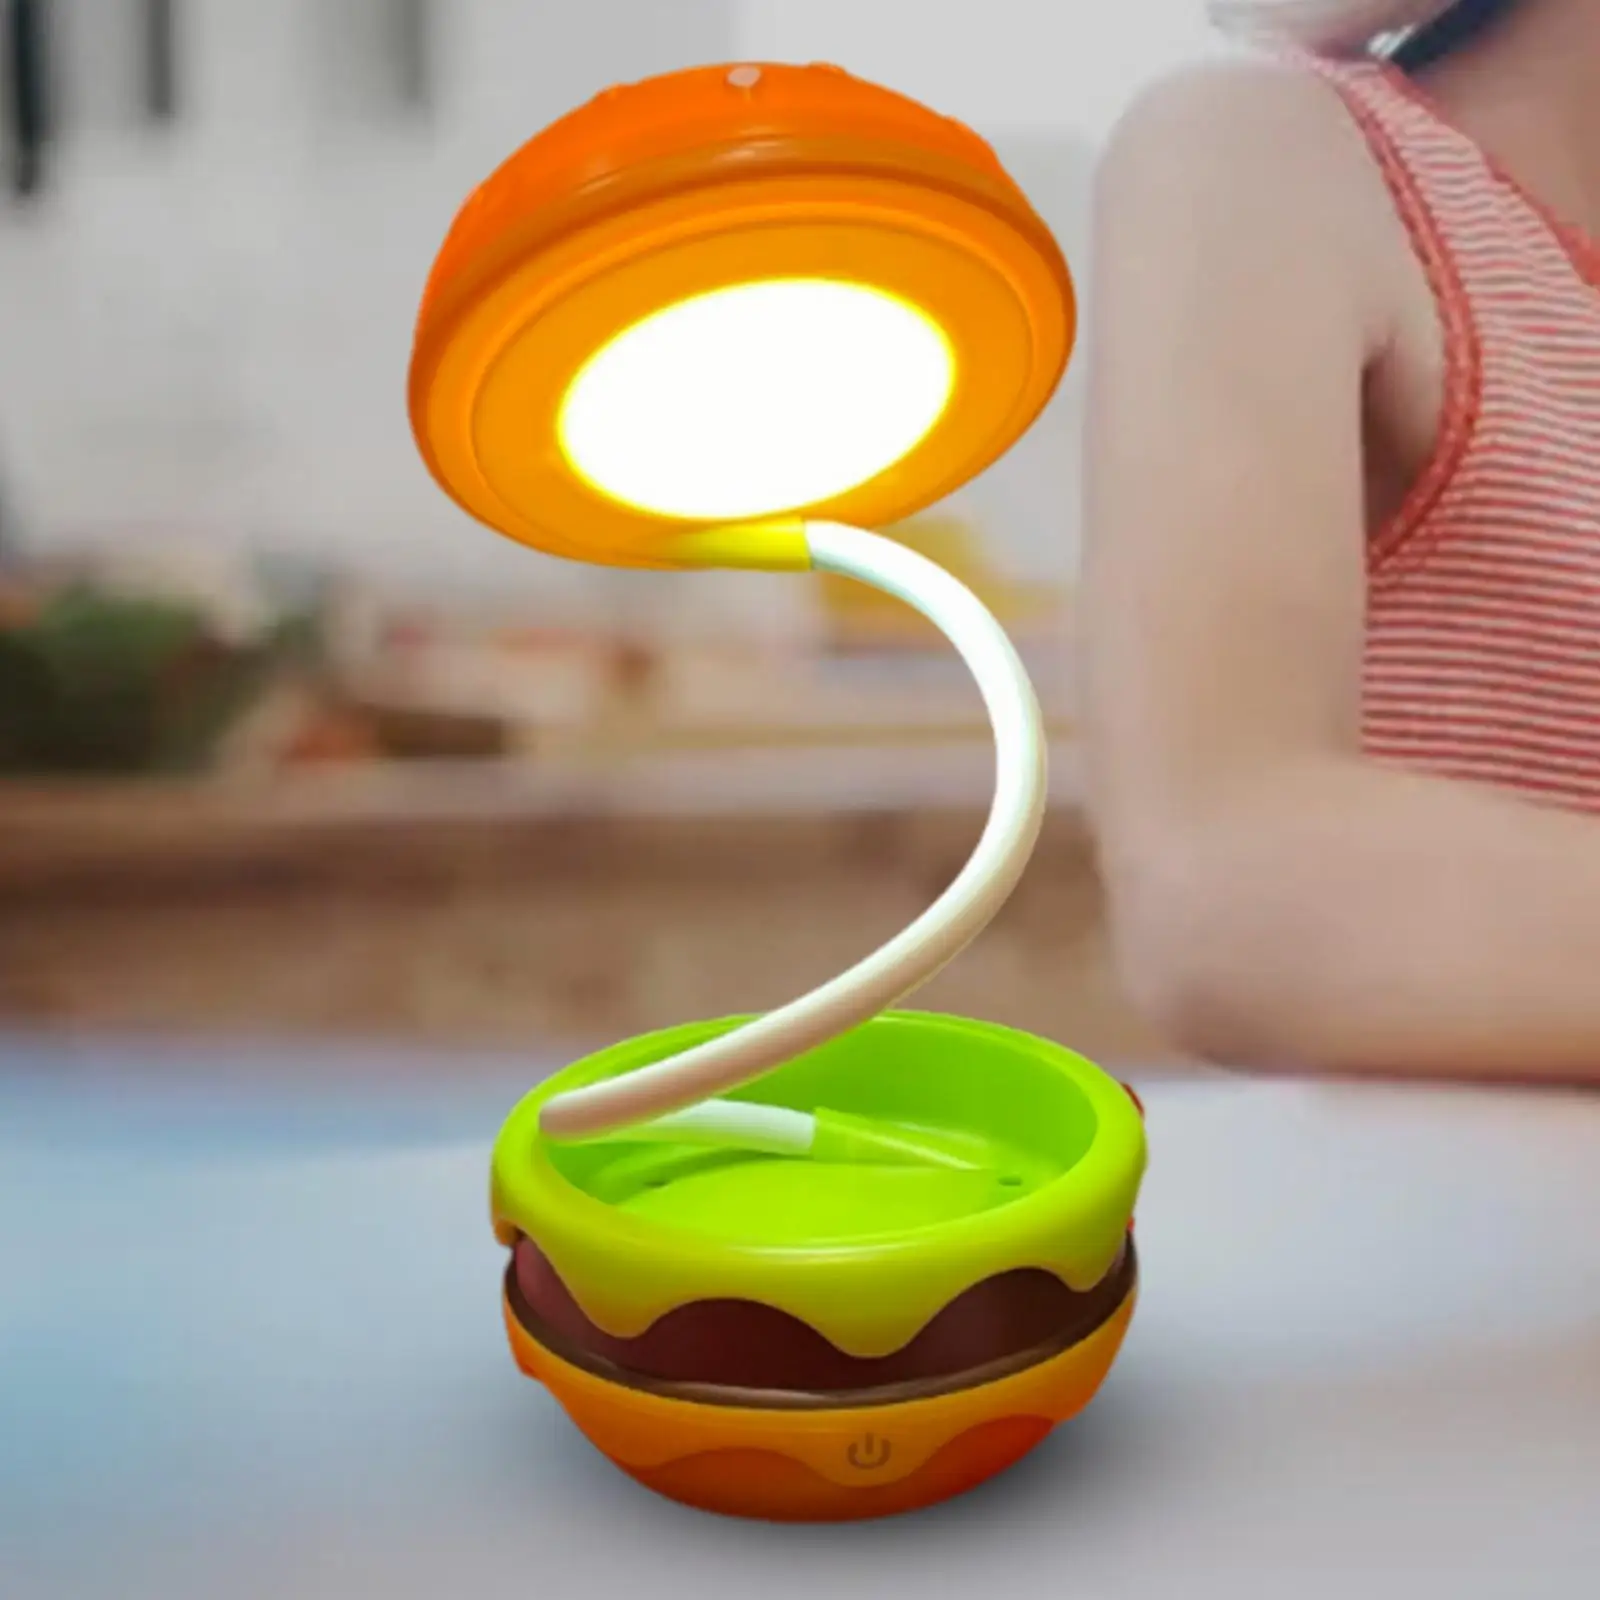 Hamburger Table Lamp Portable Rechargeable Retractable Dimmable Nursery Night Light Kids Lamp for Study Bedroom Office Home Gift